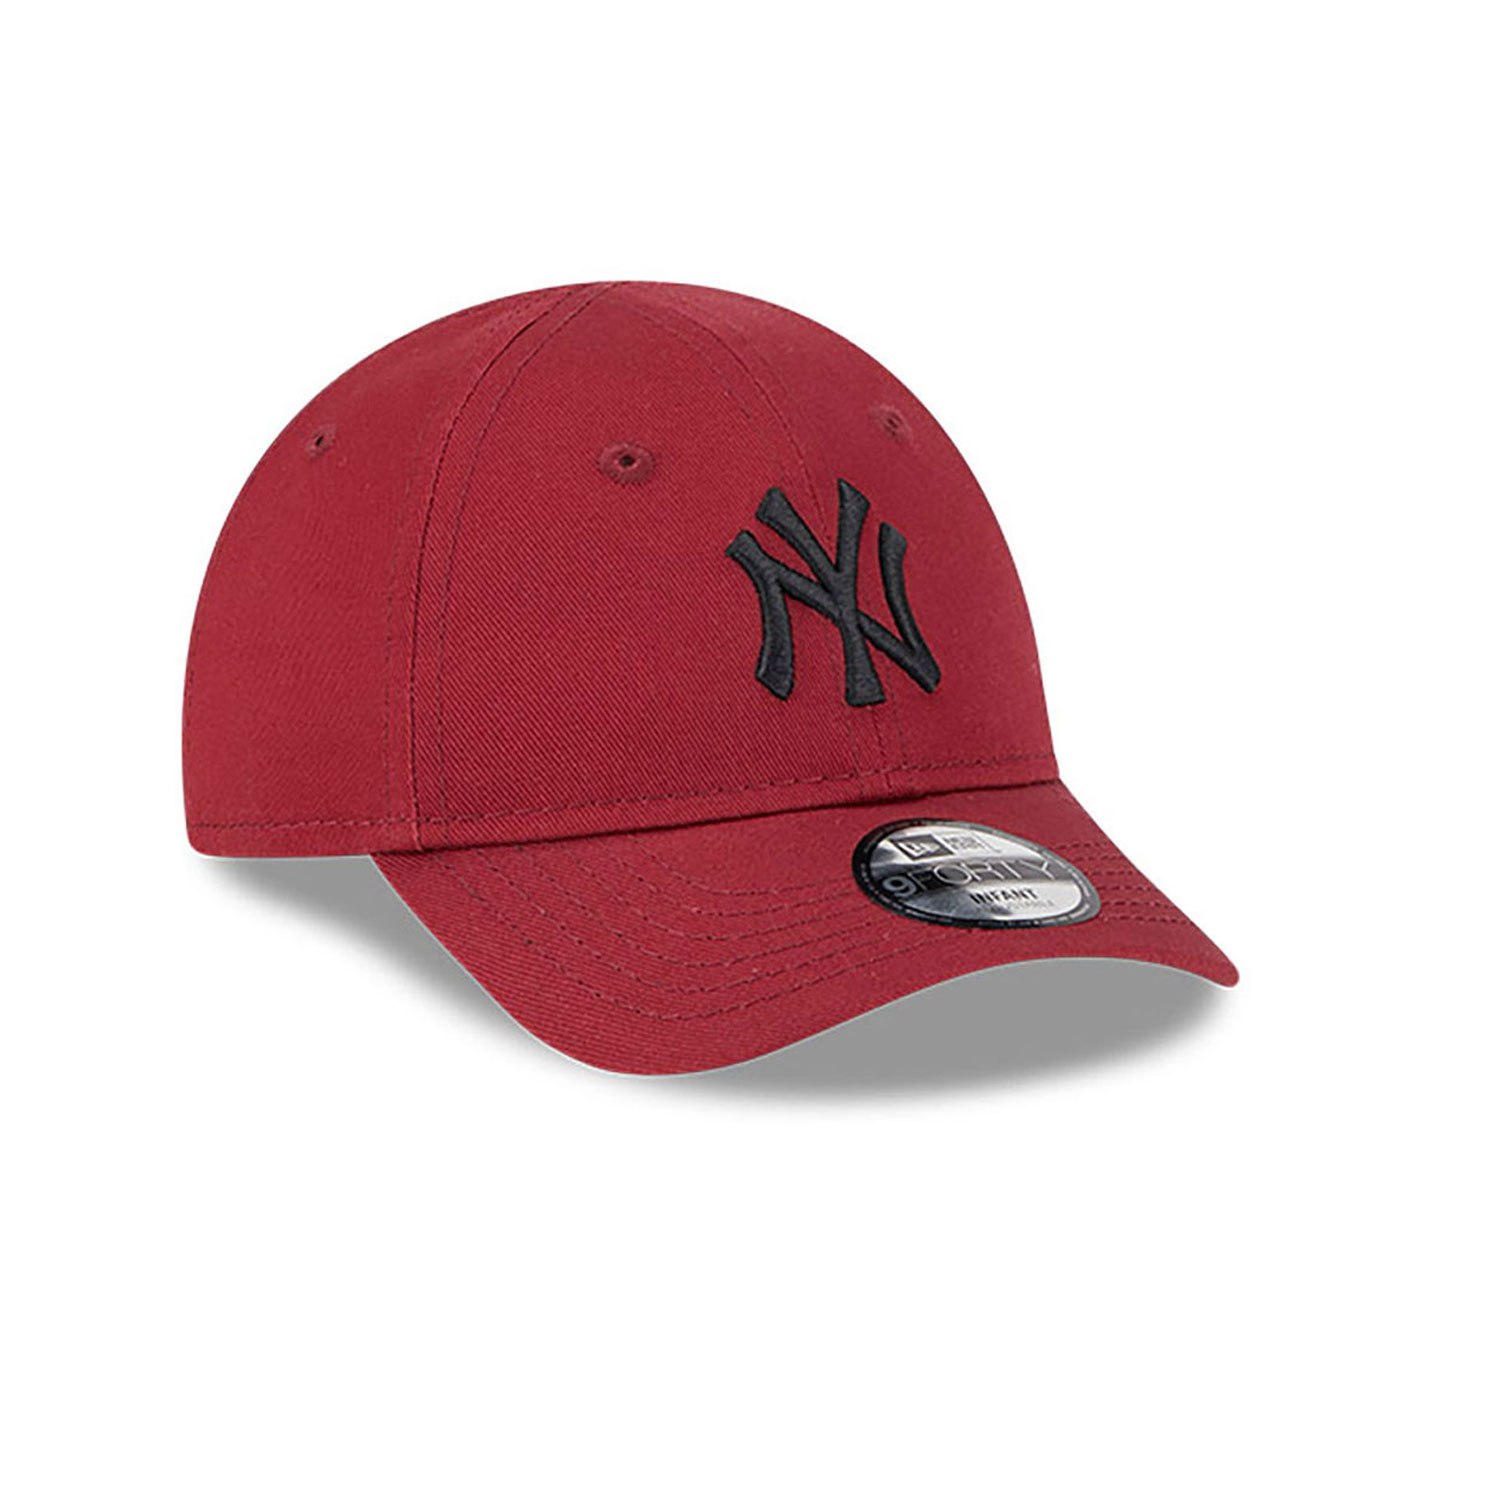 New York Yankees Infant League Essential Red 9FORTY Adjustable Cap